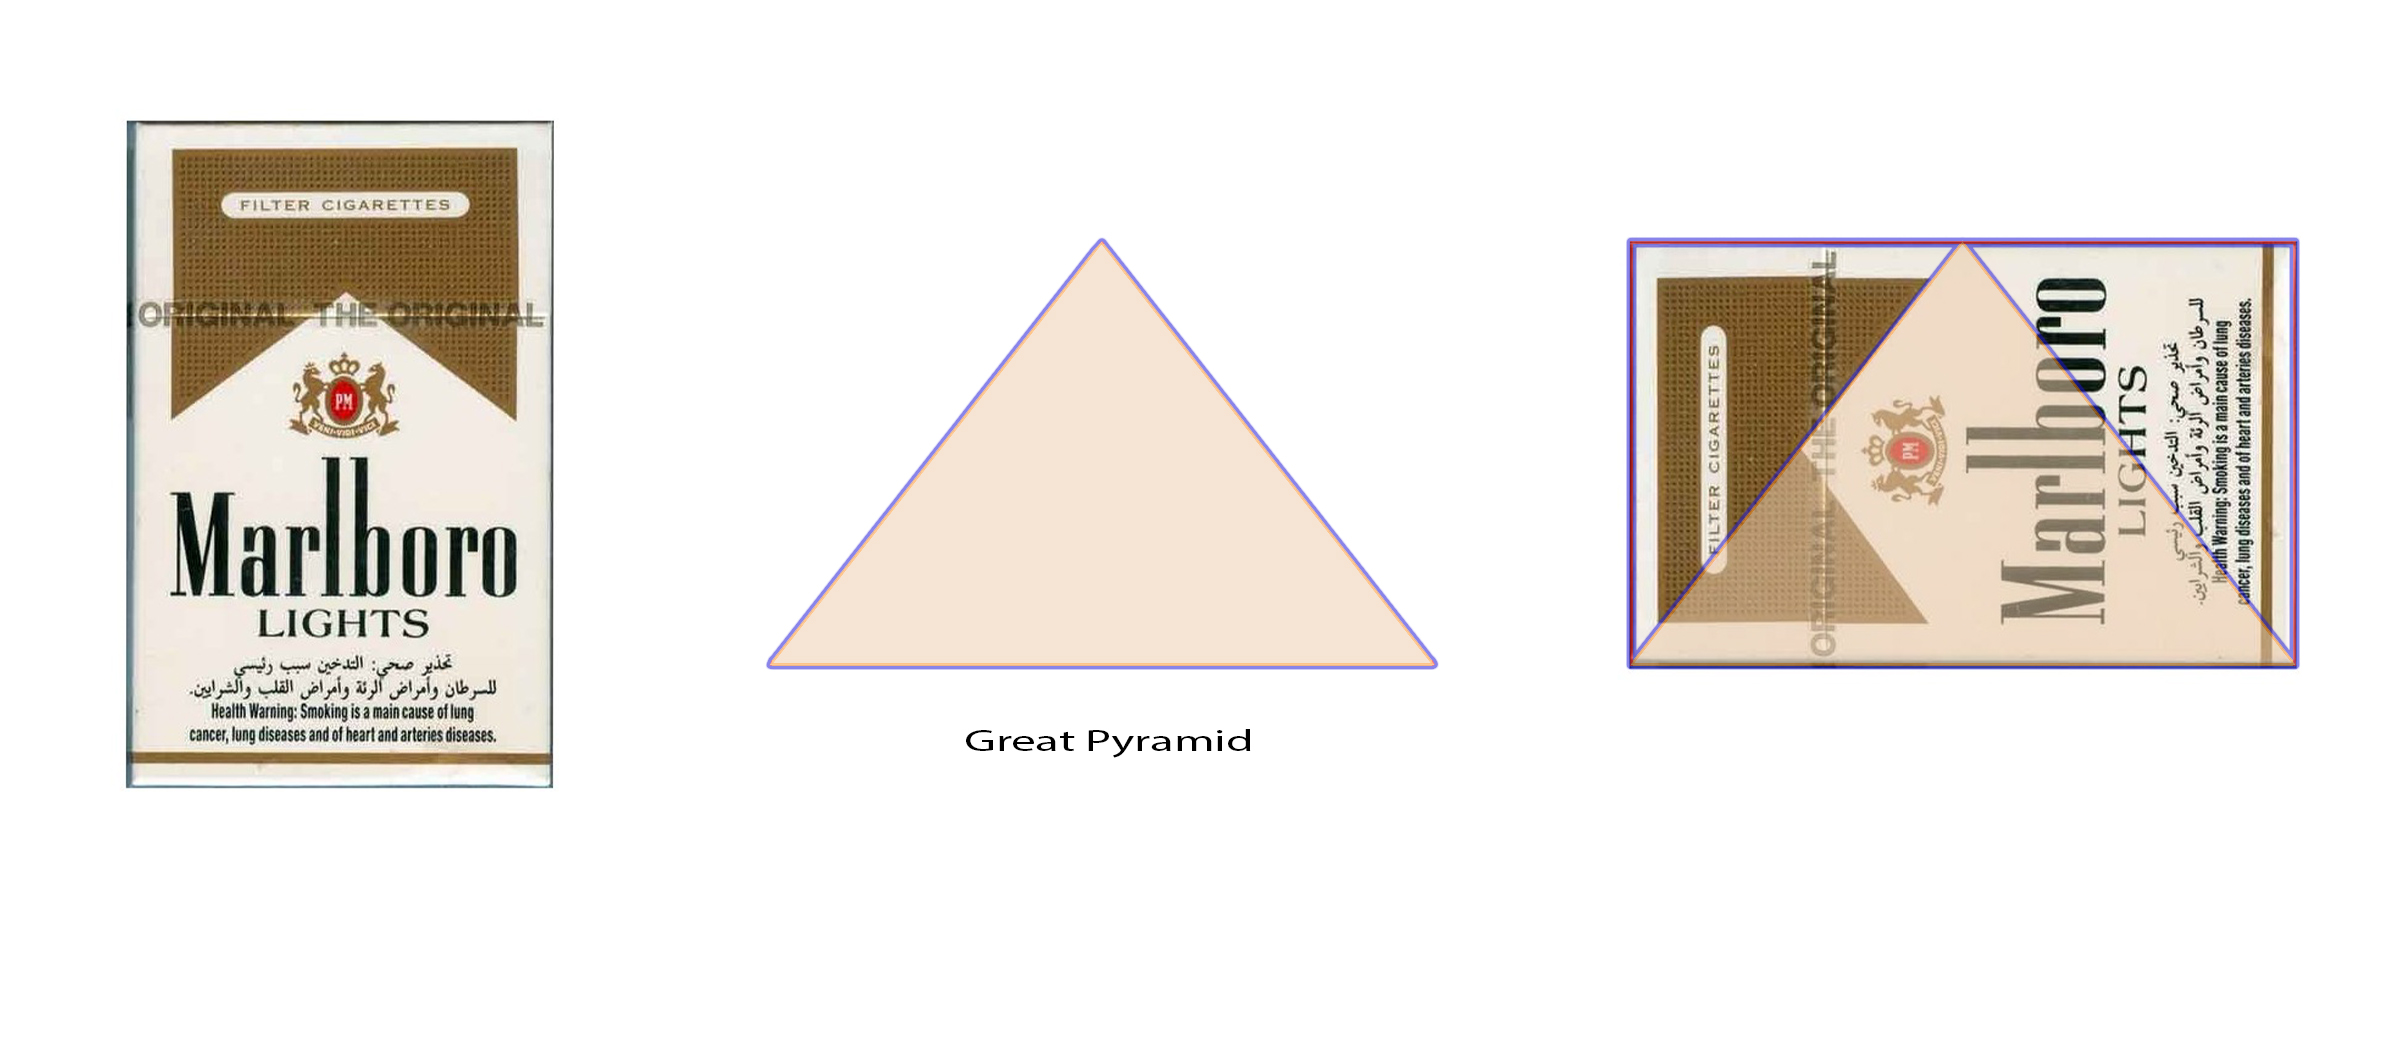 How the Great Pyramid was used to design smokes